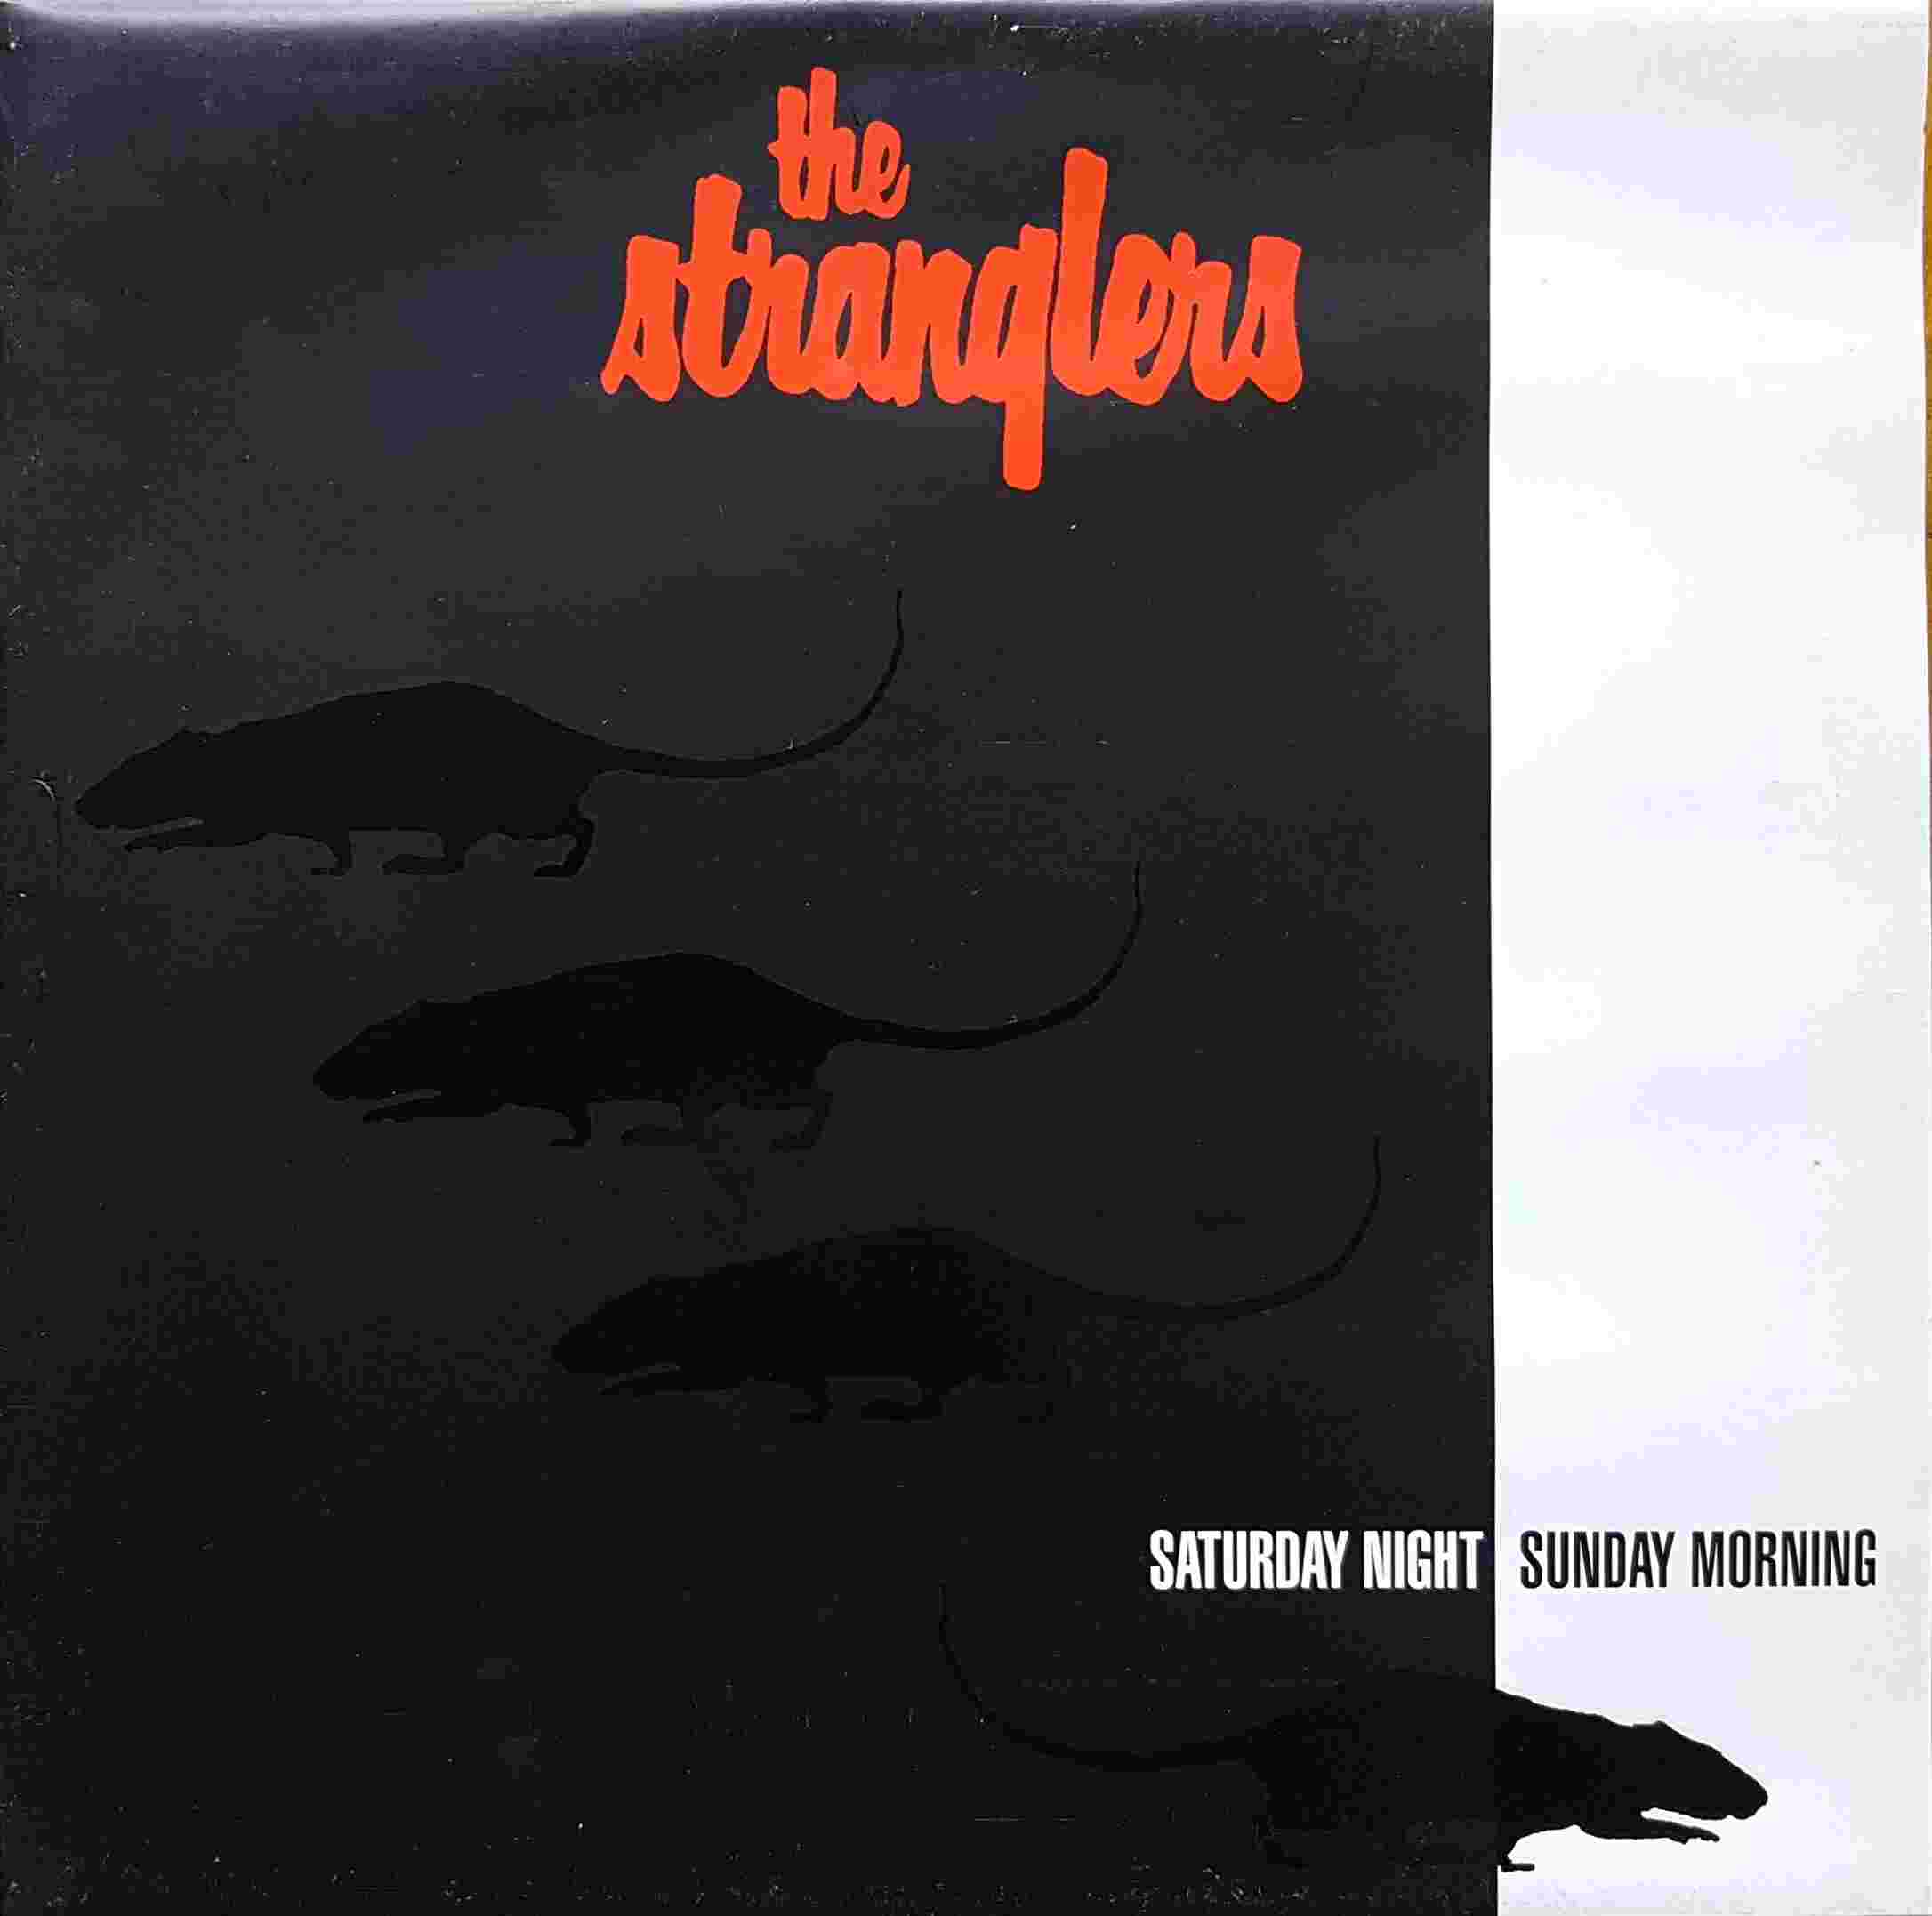 Picture of ESSLP 194 Saturday night, Sunday morning by artist The Stranglers from The Stranglers